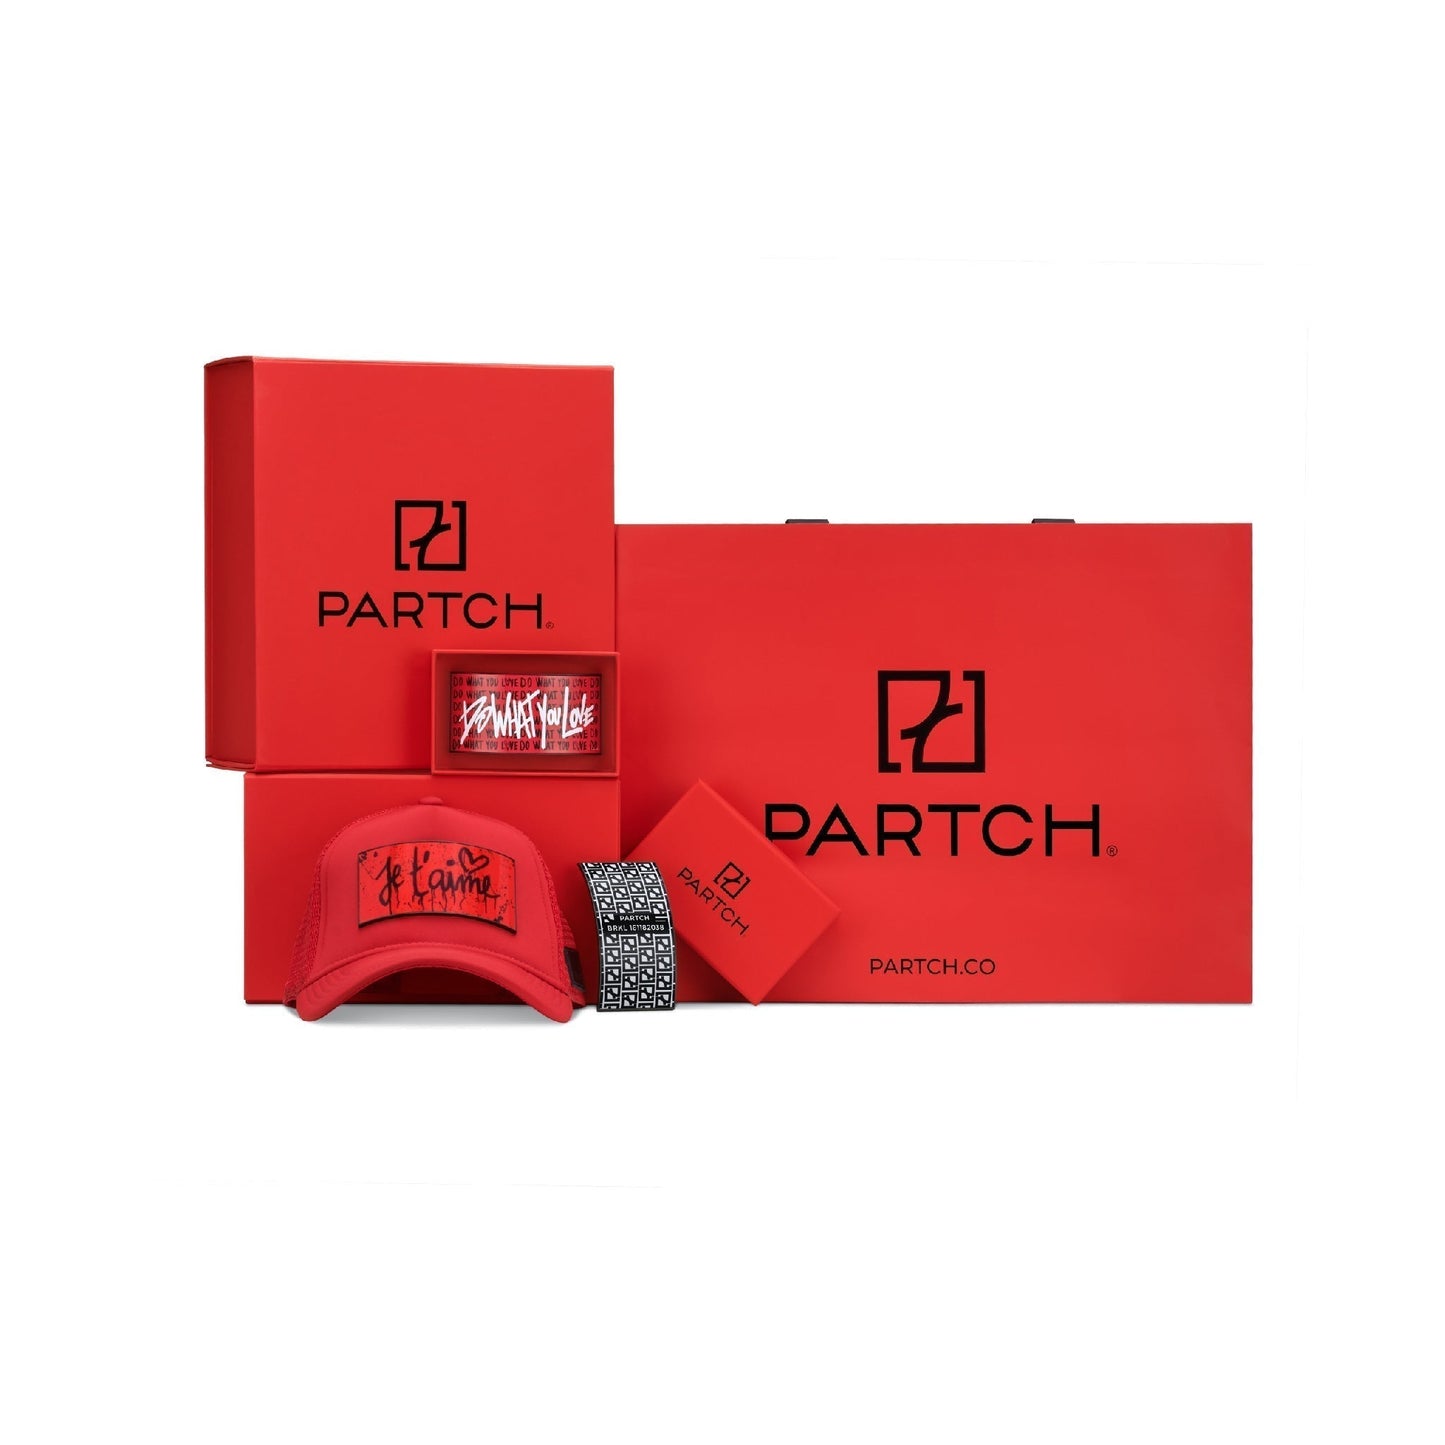 PARTCH Set Luxury Packaging. Shopping bag, box, bag, hats, caps.